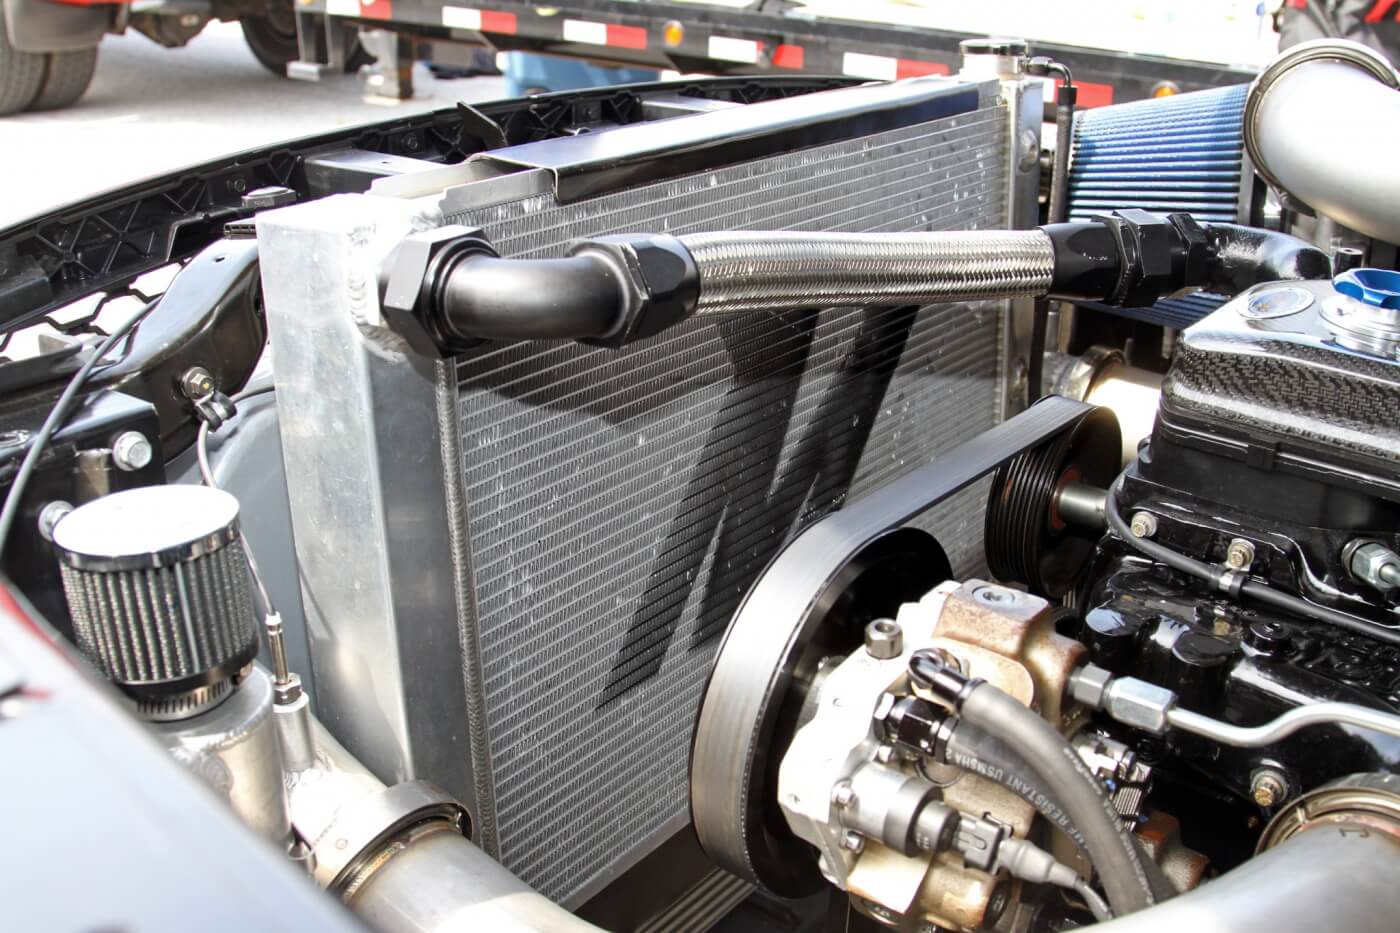 Milliken relies on a Mishimoto aluminum radiator to keep the powerful Cummins cool, as well as a Mishimoto intercooler to keep the intake charge cool when the truck reaches top speeds.